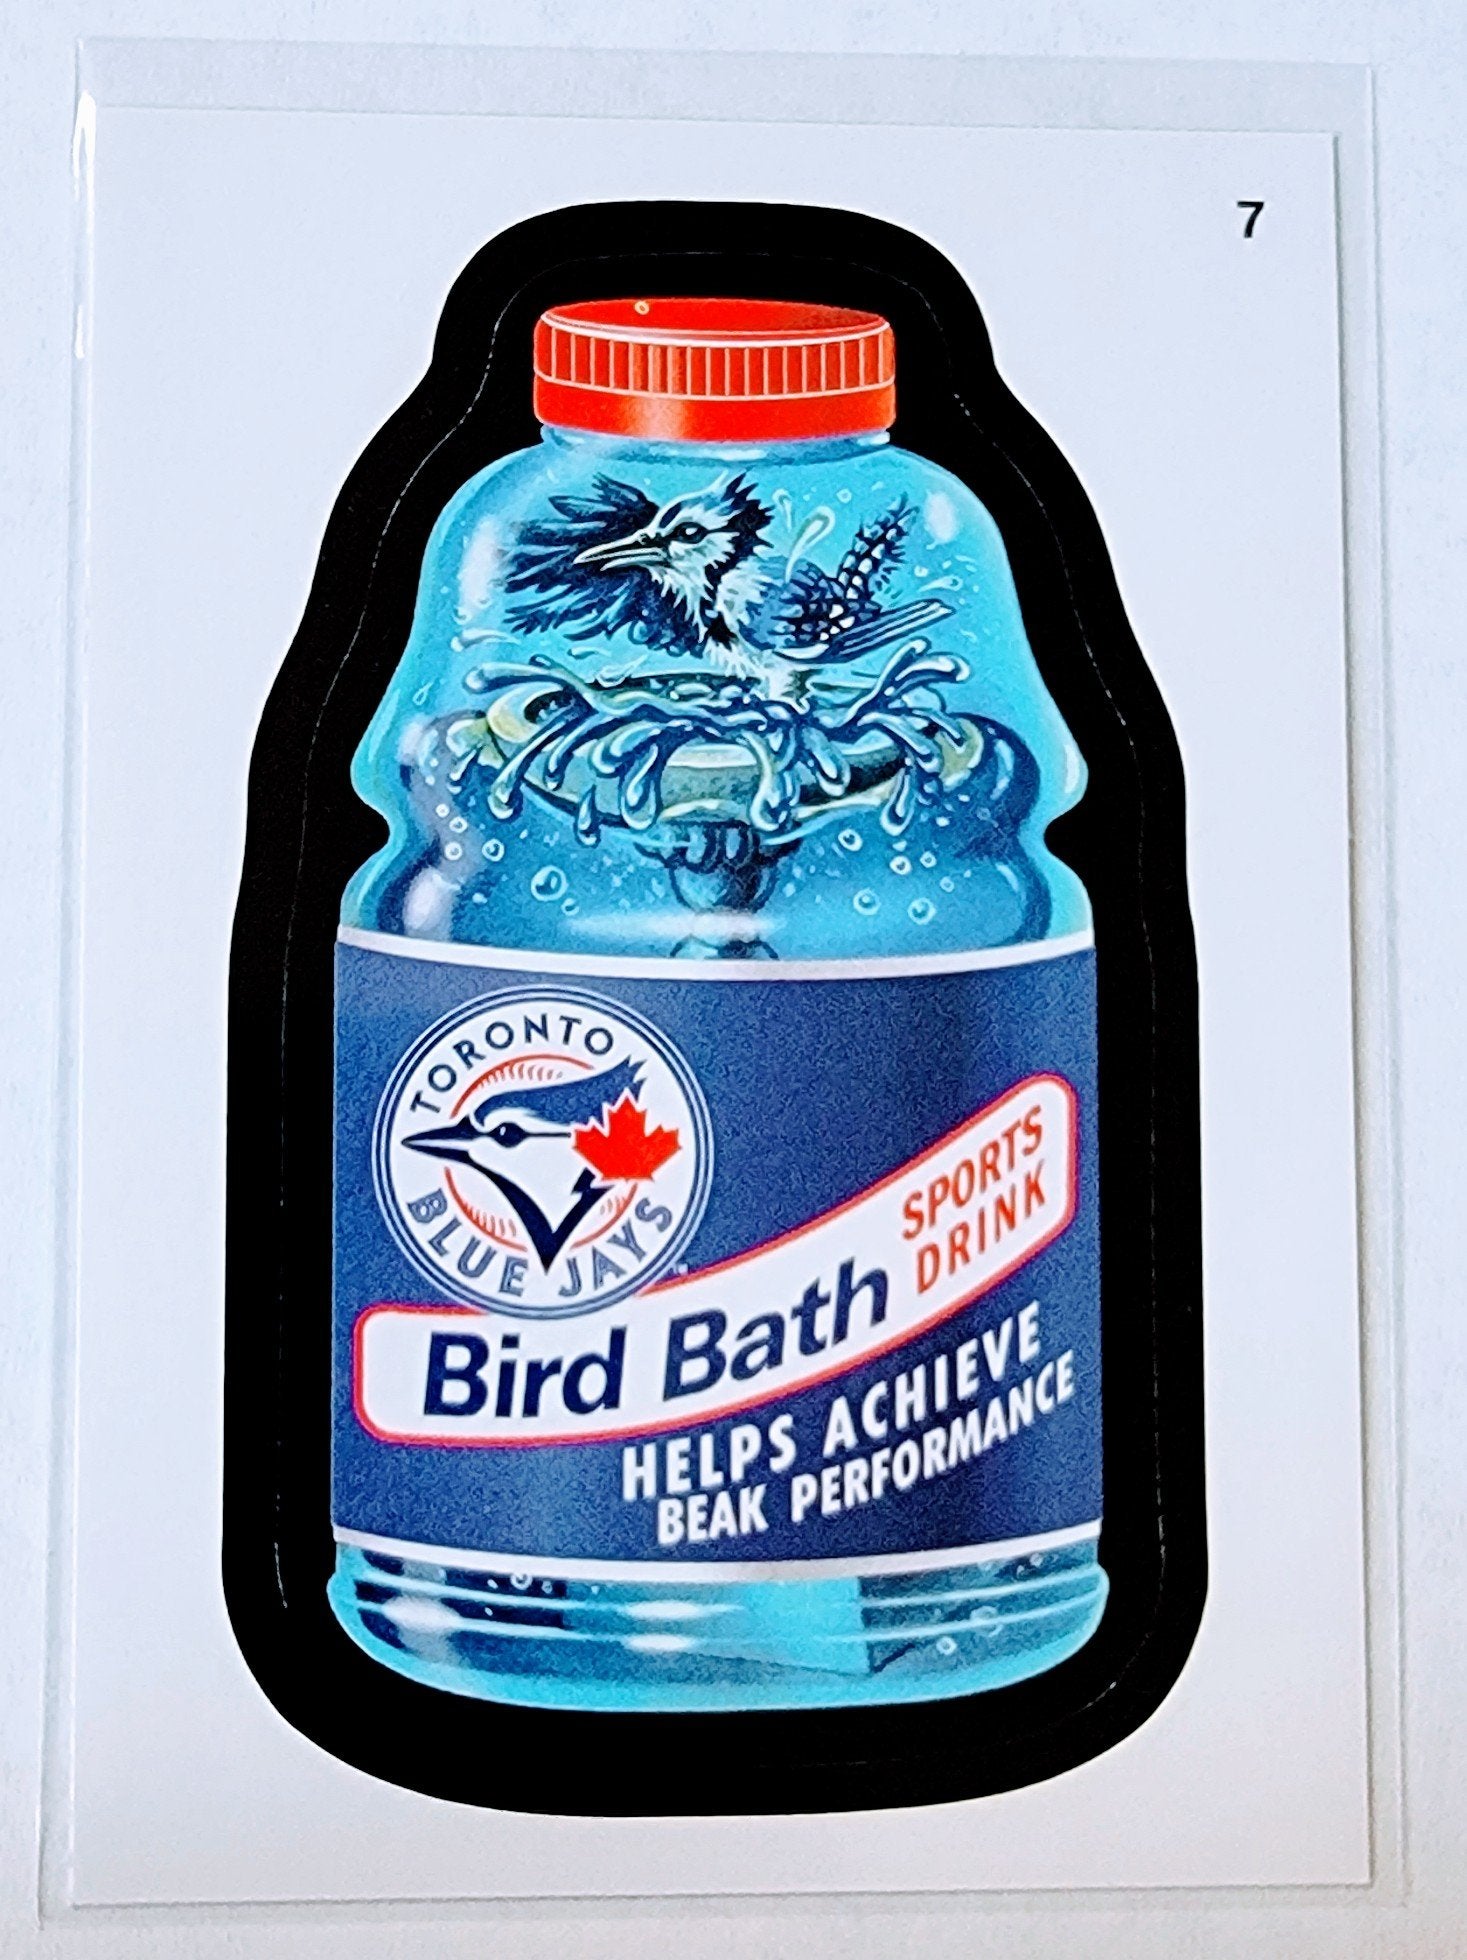 2016 Topps MLB Baseball Wacky Packages Toronto Blue Jays Bird Bath Sticker Trading Card MCSC1 simple Xclusive Collectibles   